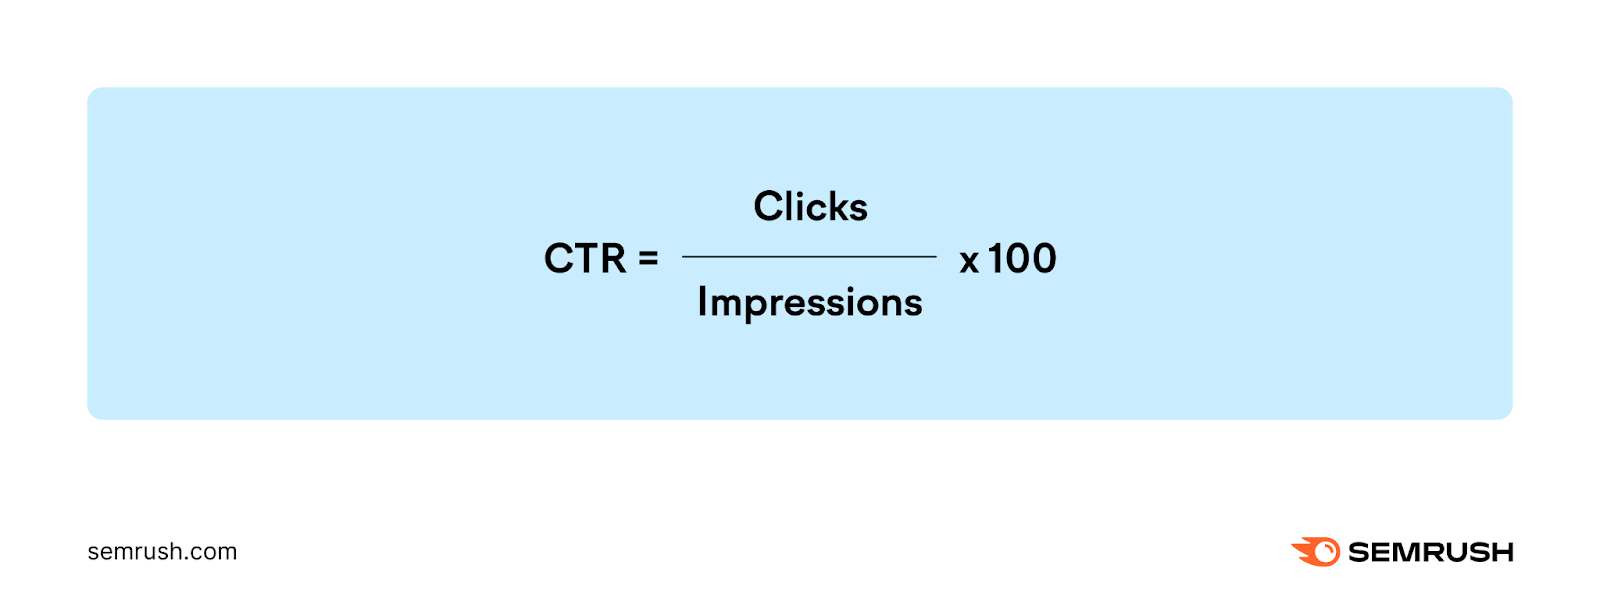 CTR is calculated by dividing the number of clicks by the number of website impressions and multiplying that by 100